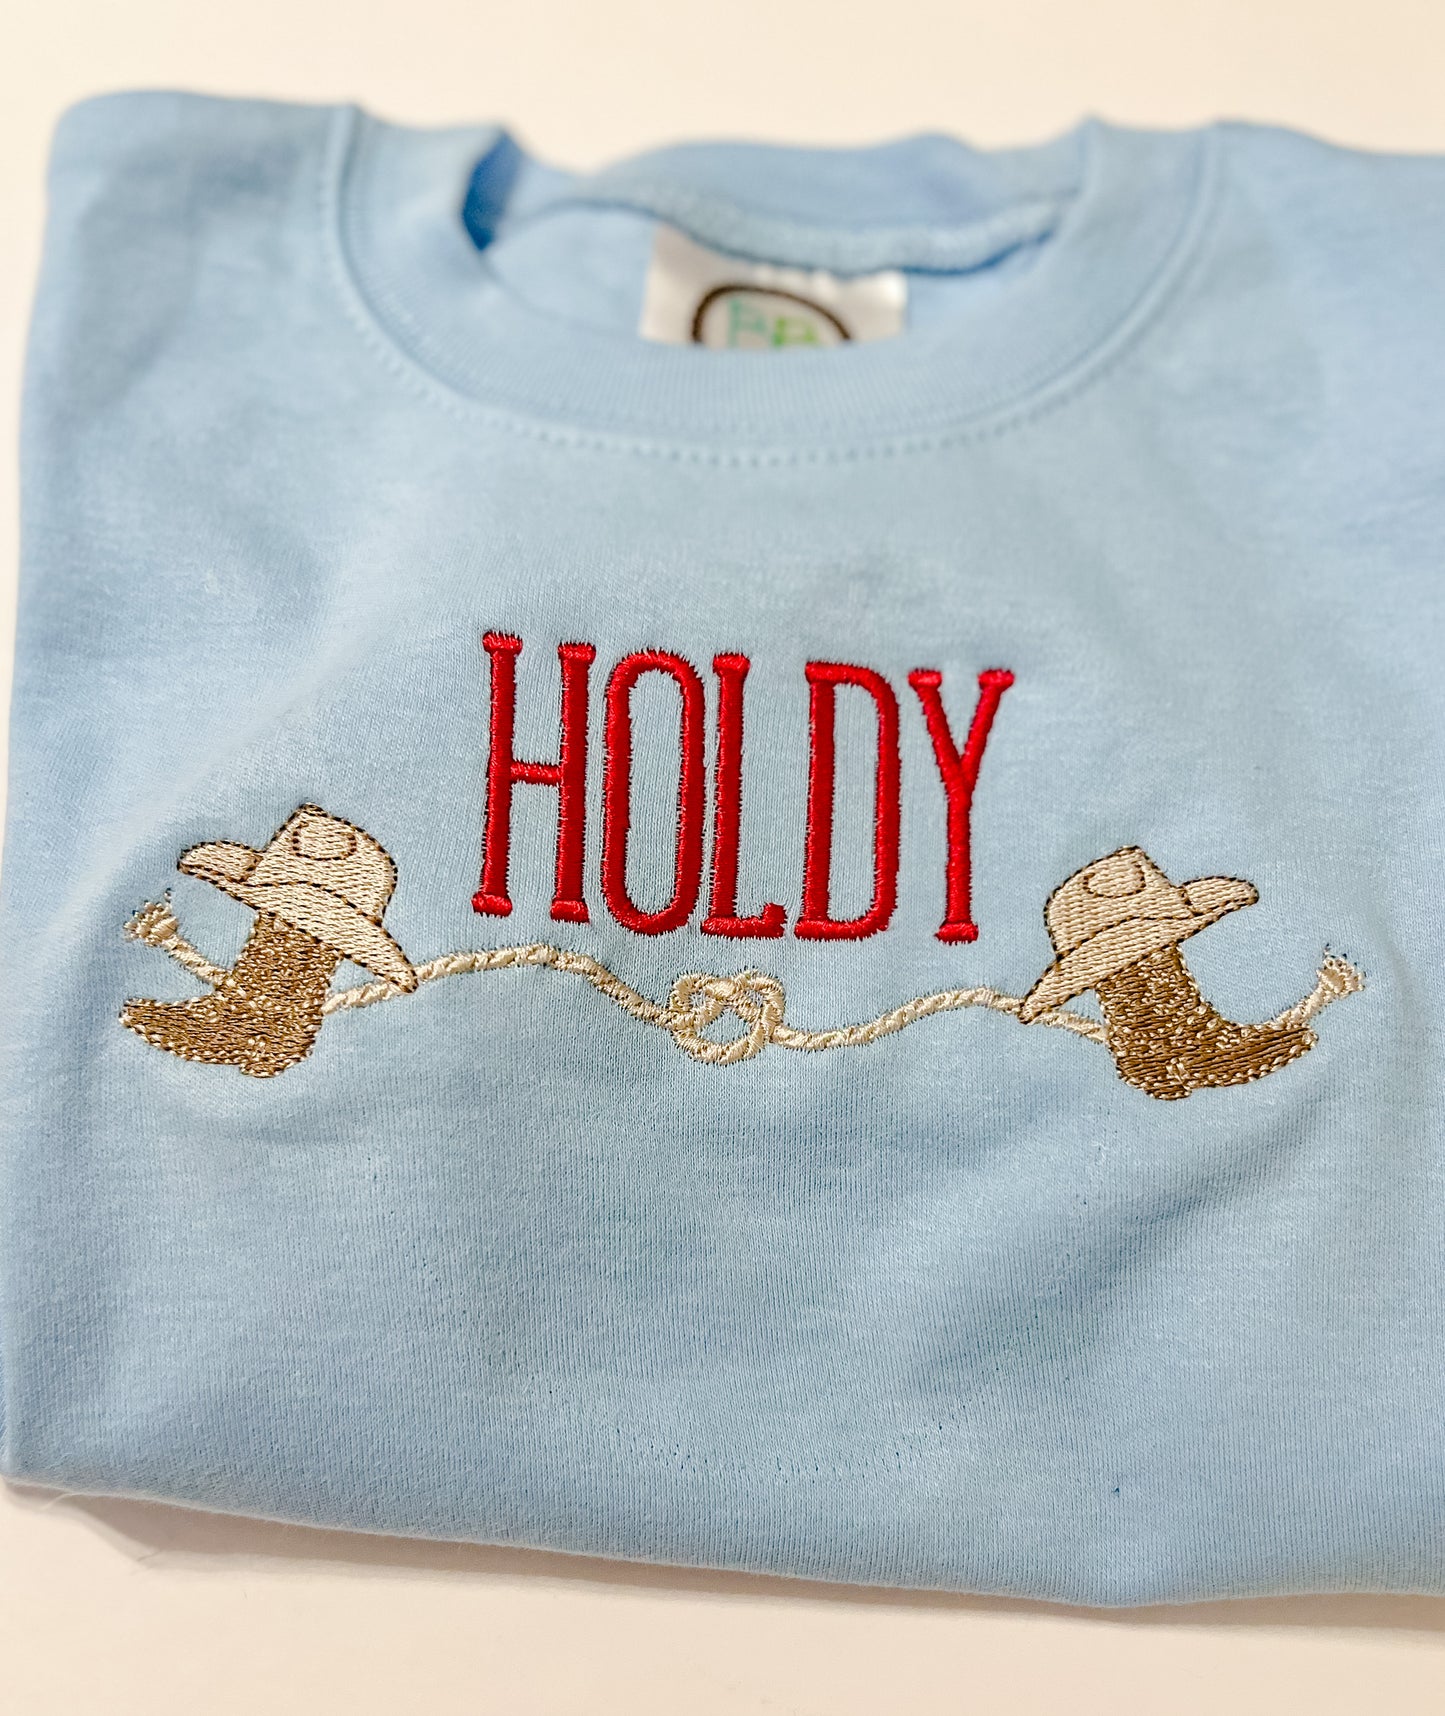 Holdy’s Boots tee